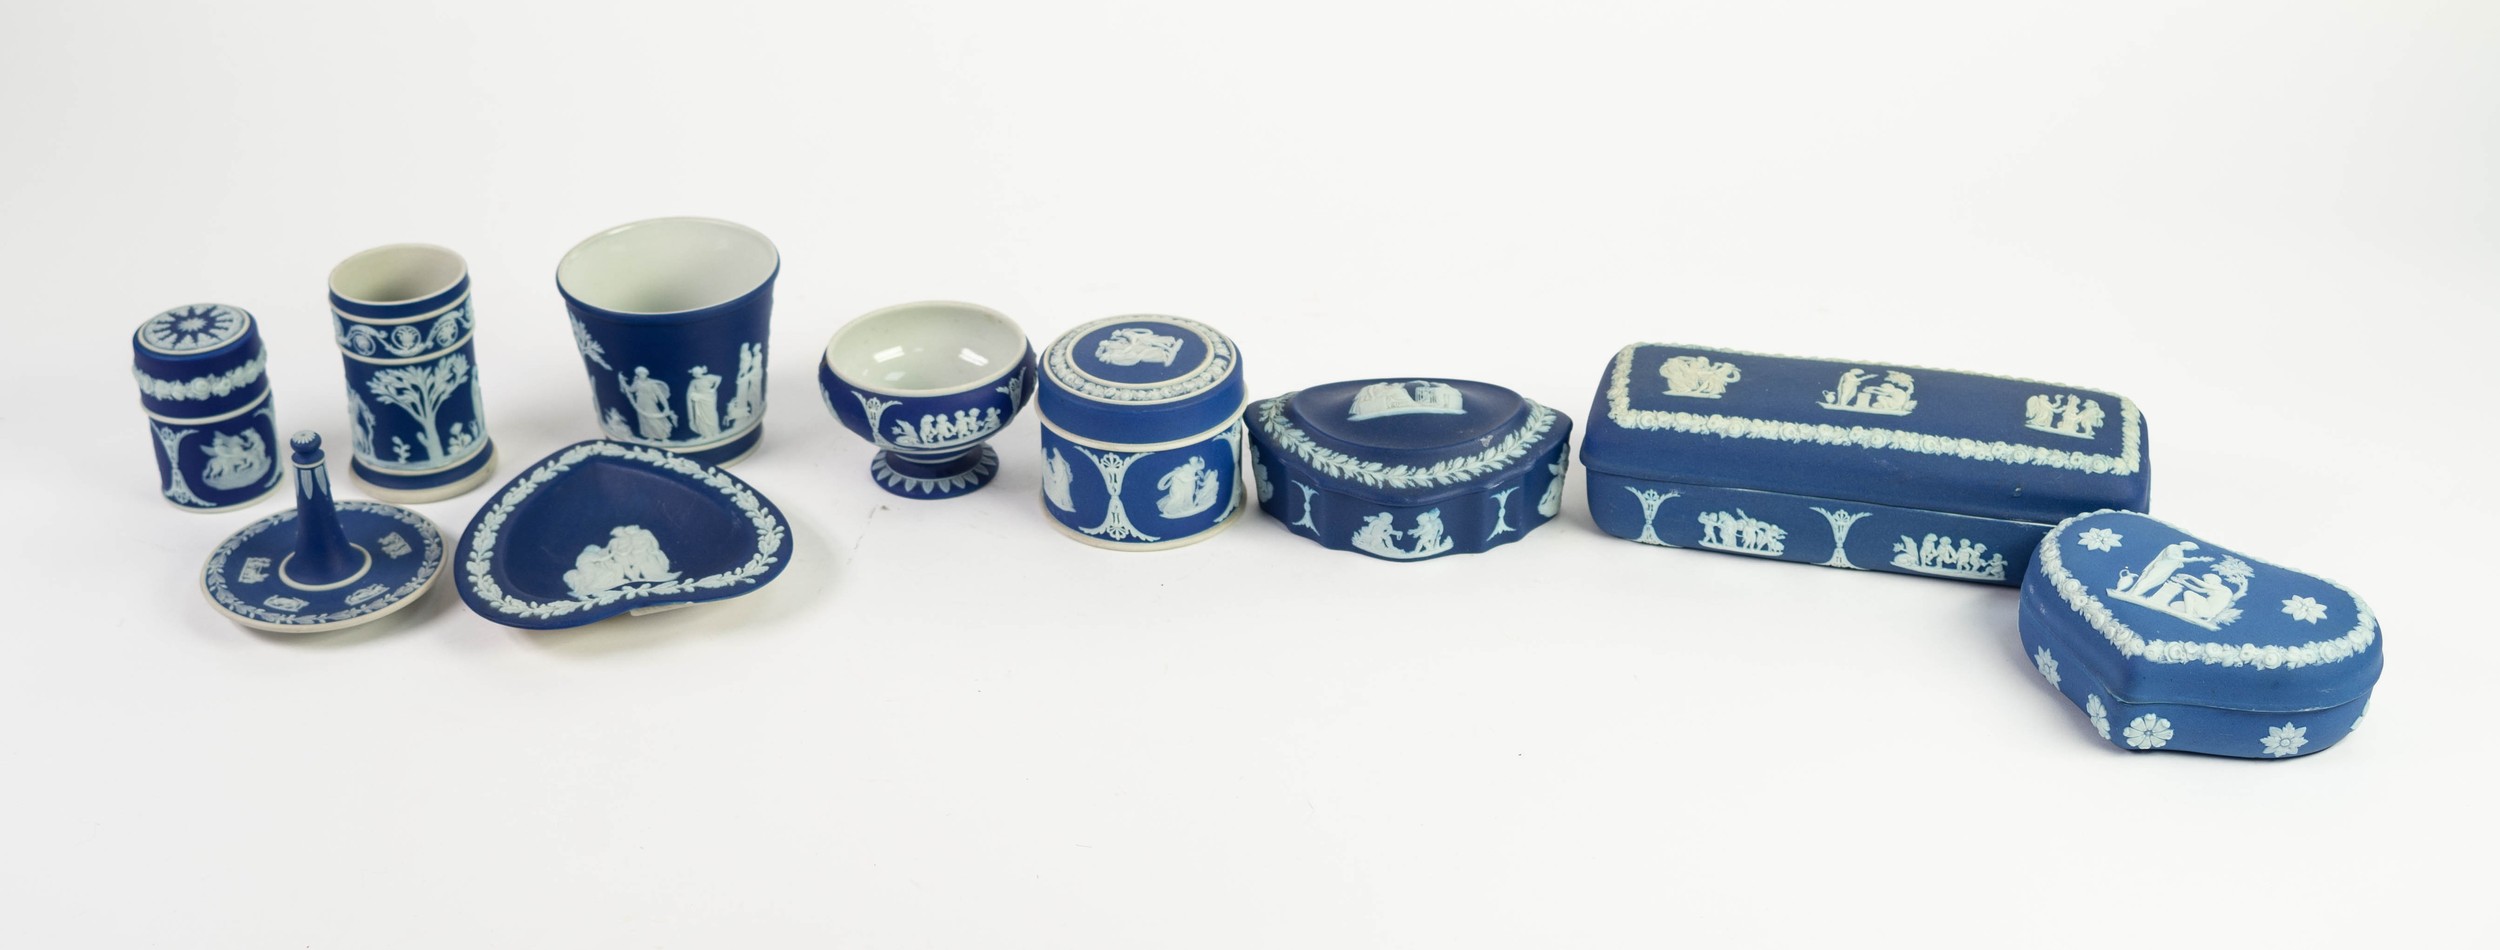 TEN PIECES OF WEDGWOOD DARK BLUE AND WHITE JASPER WARE, to include an oblong box and cover, 7in (